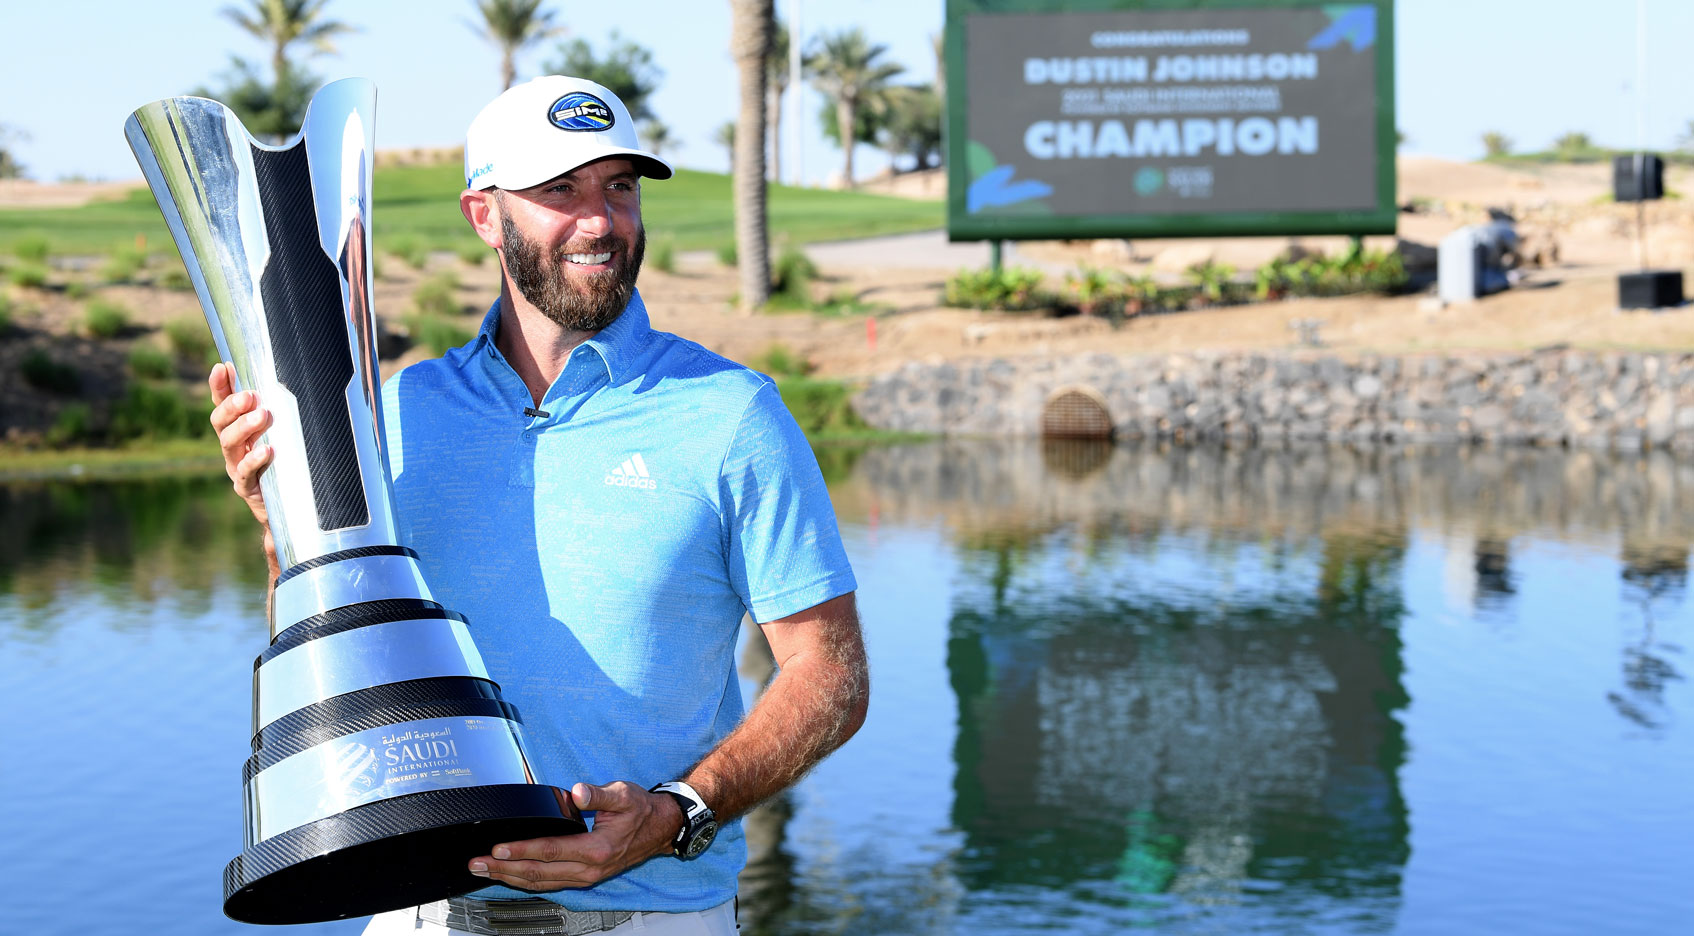 Dustin Johnson eases to another victory at Saudi International